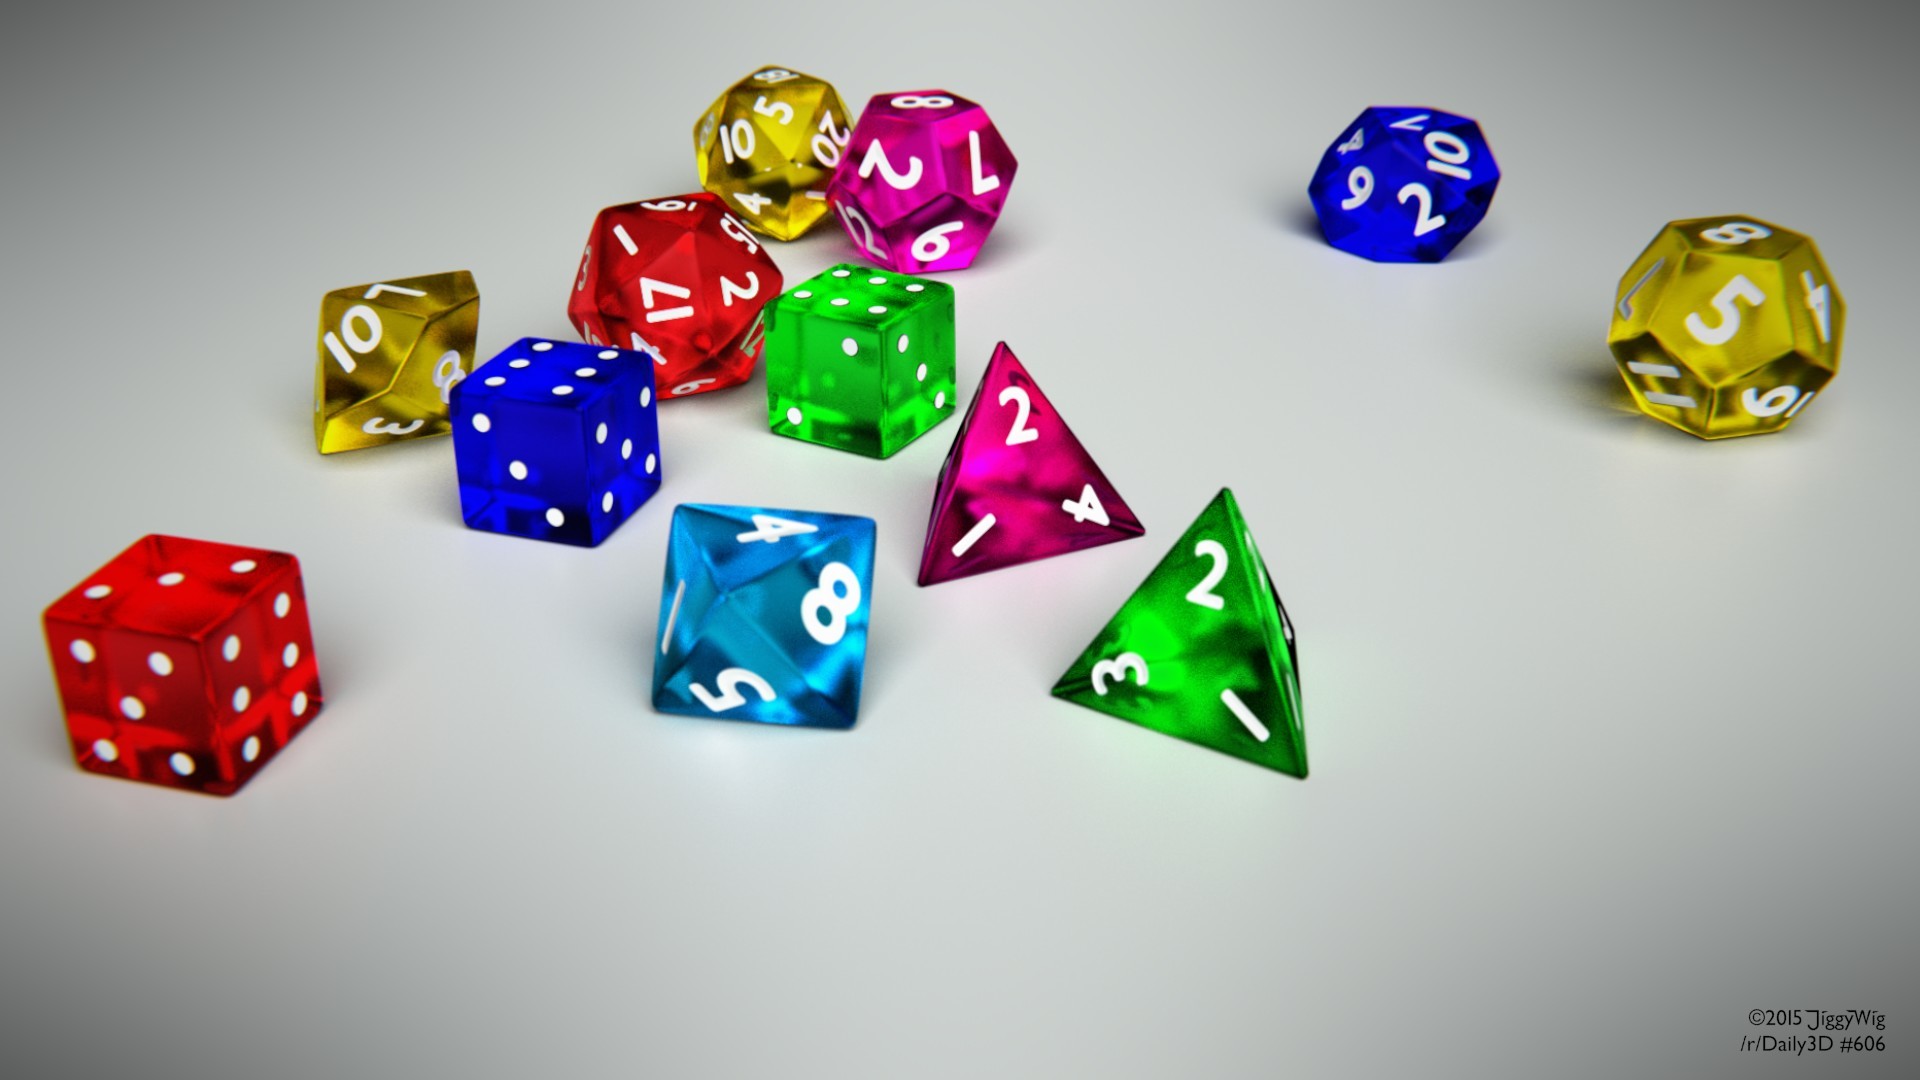 1920x1080 Here's my take on this Dice thing.